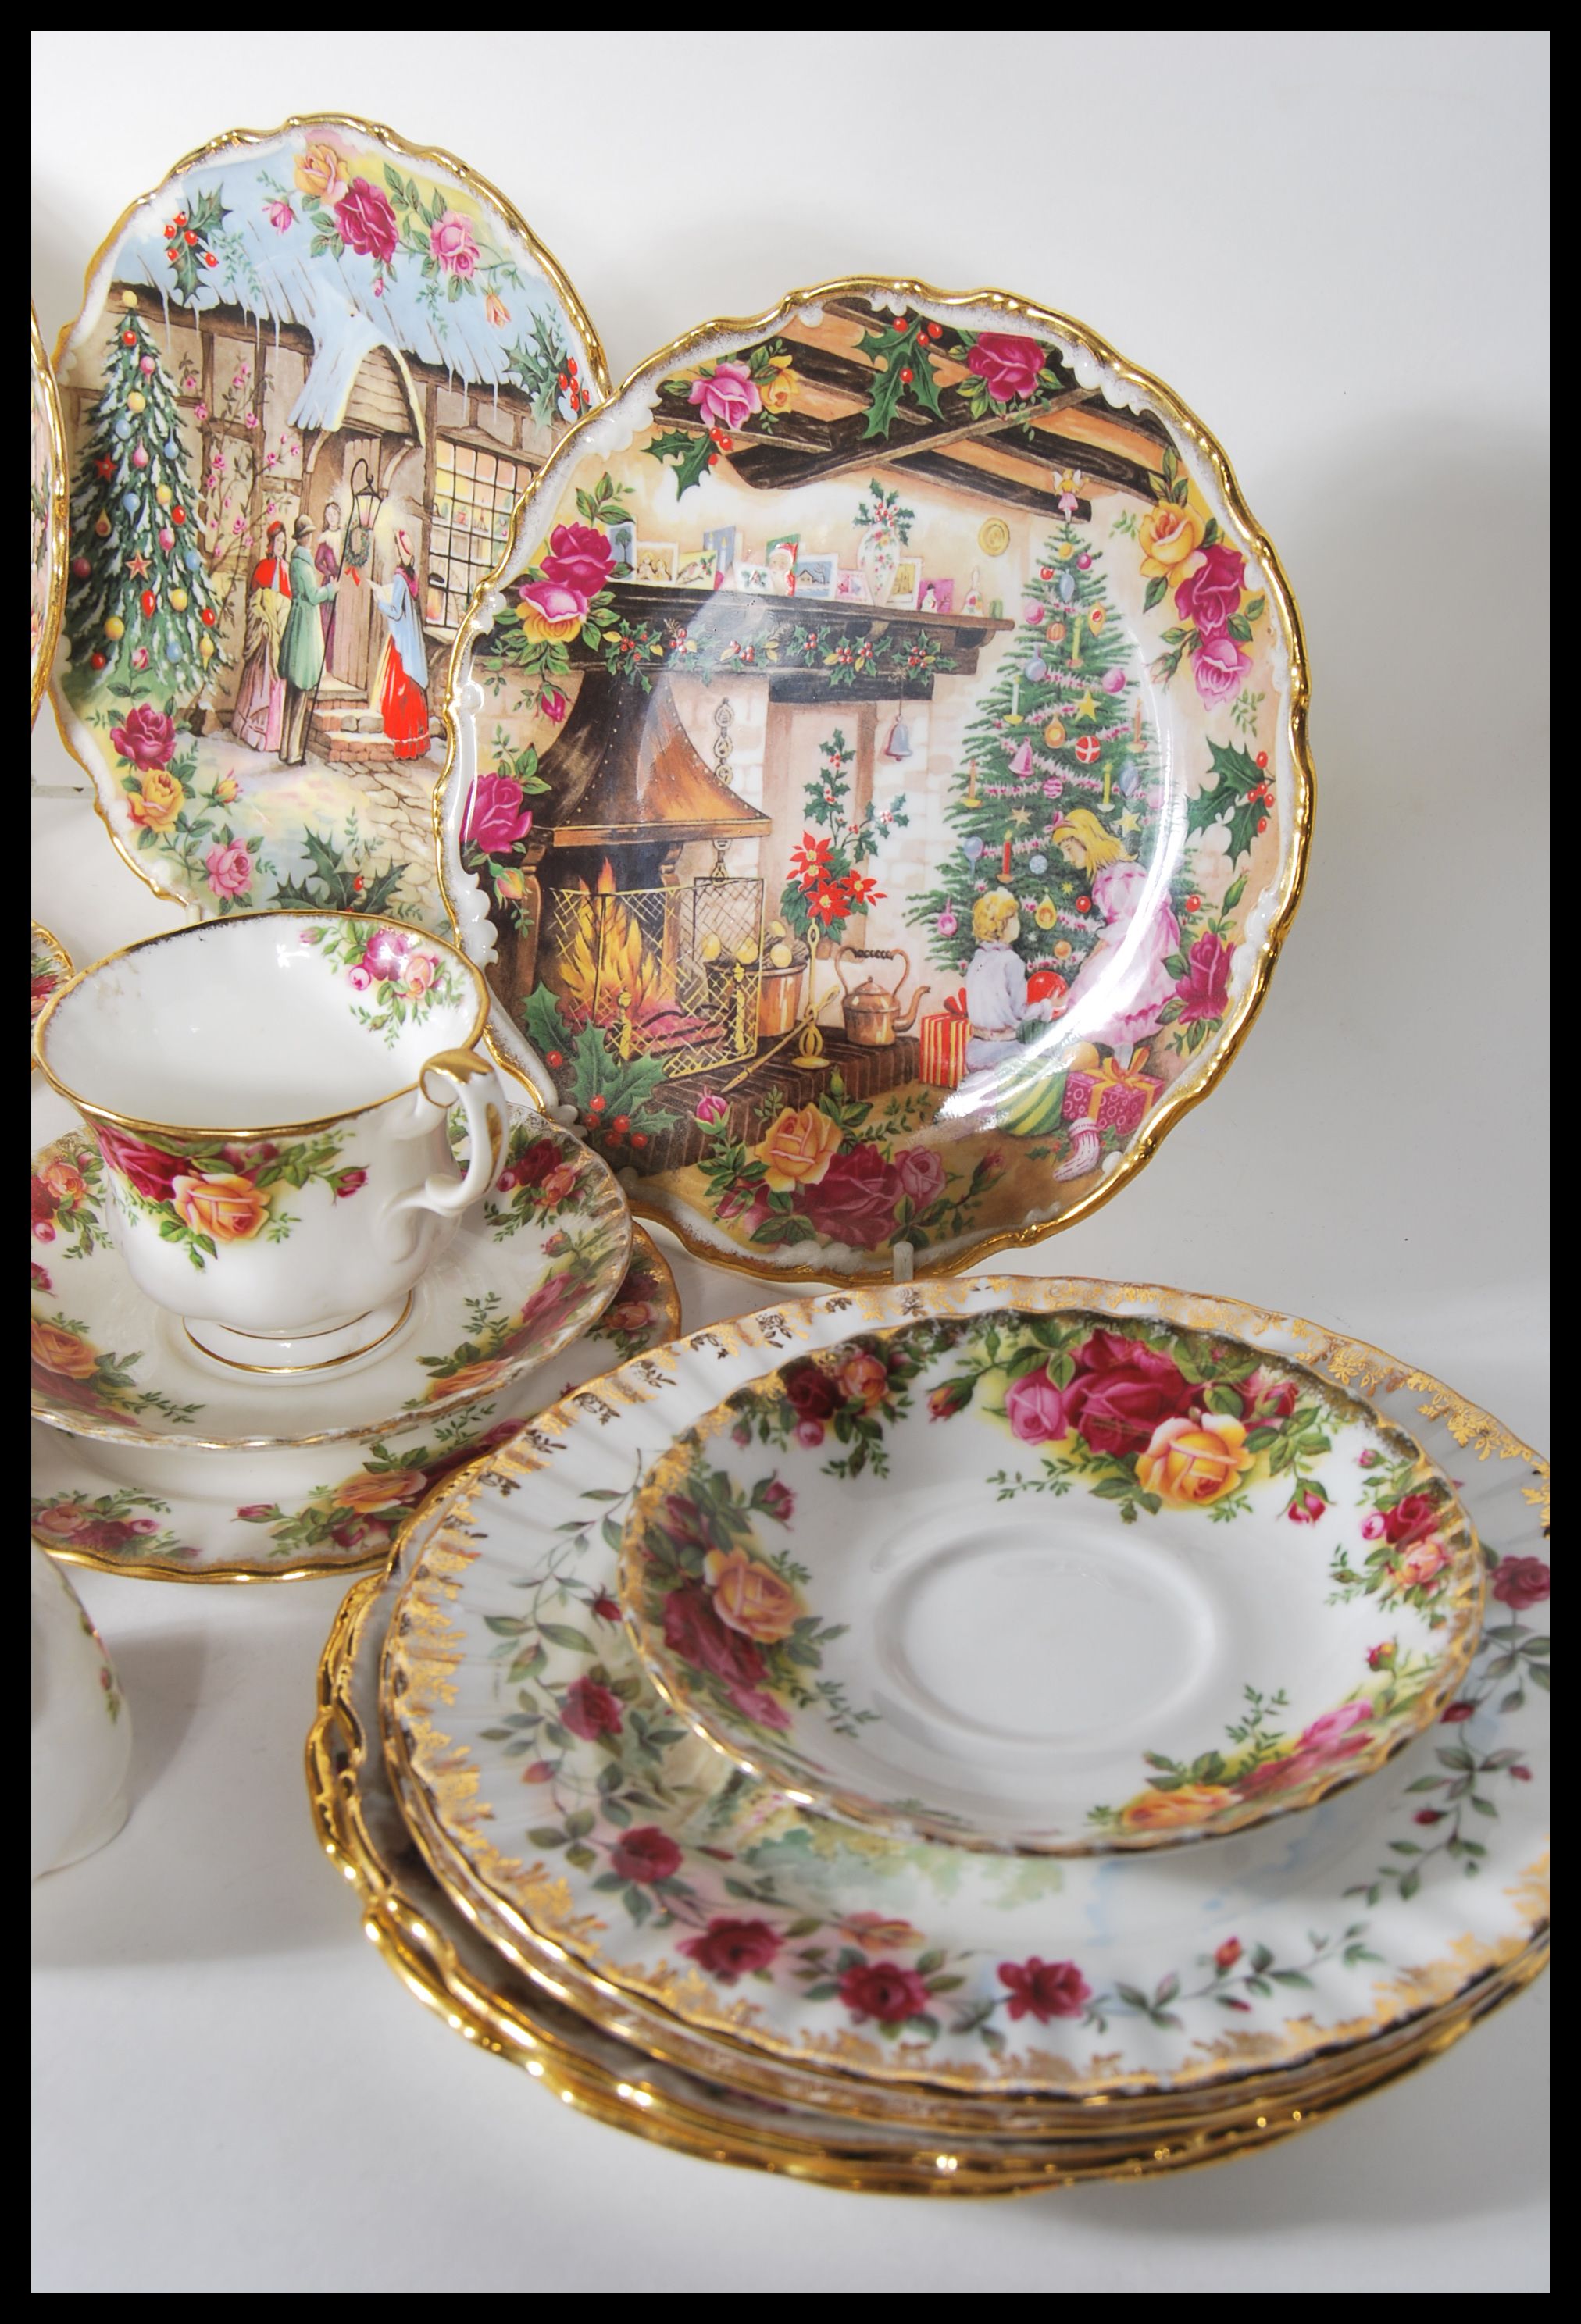 A Royal Albert Old Country Roses tea service consisting of cups, saucers, side plates, sugar bowl - Image 7 of 11